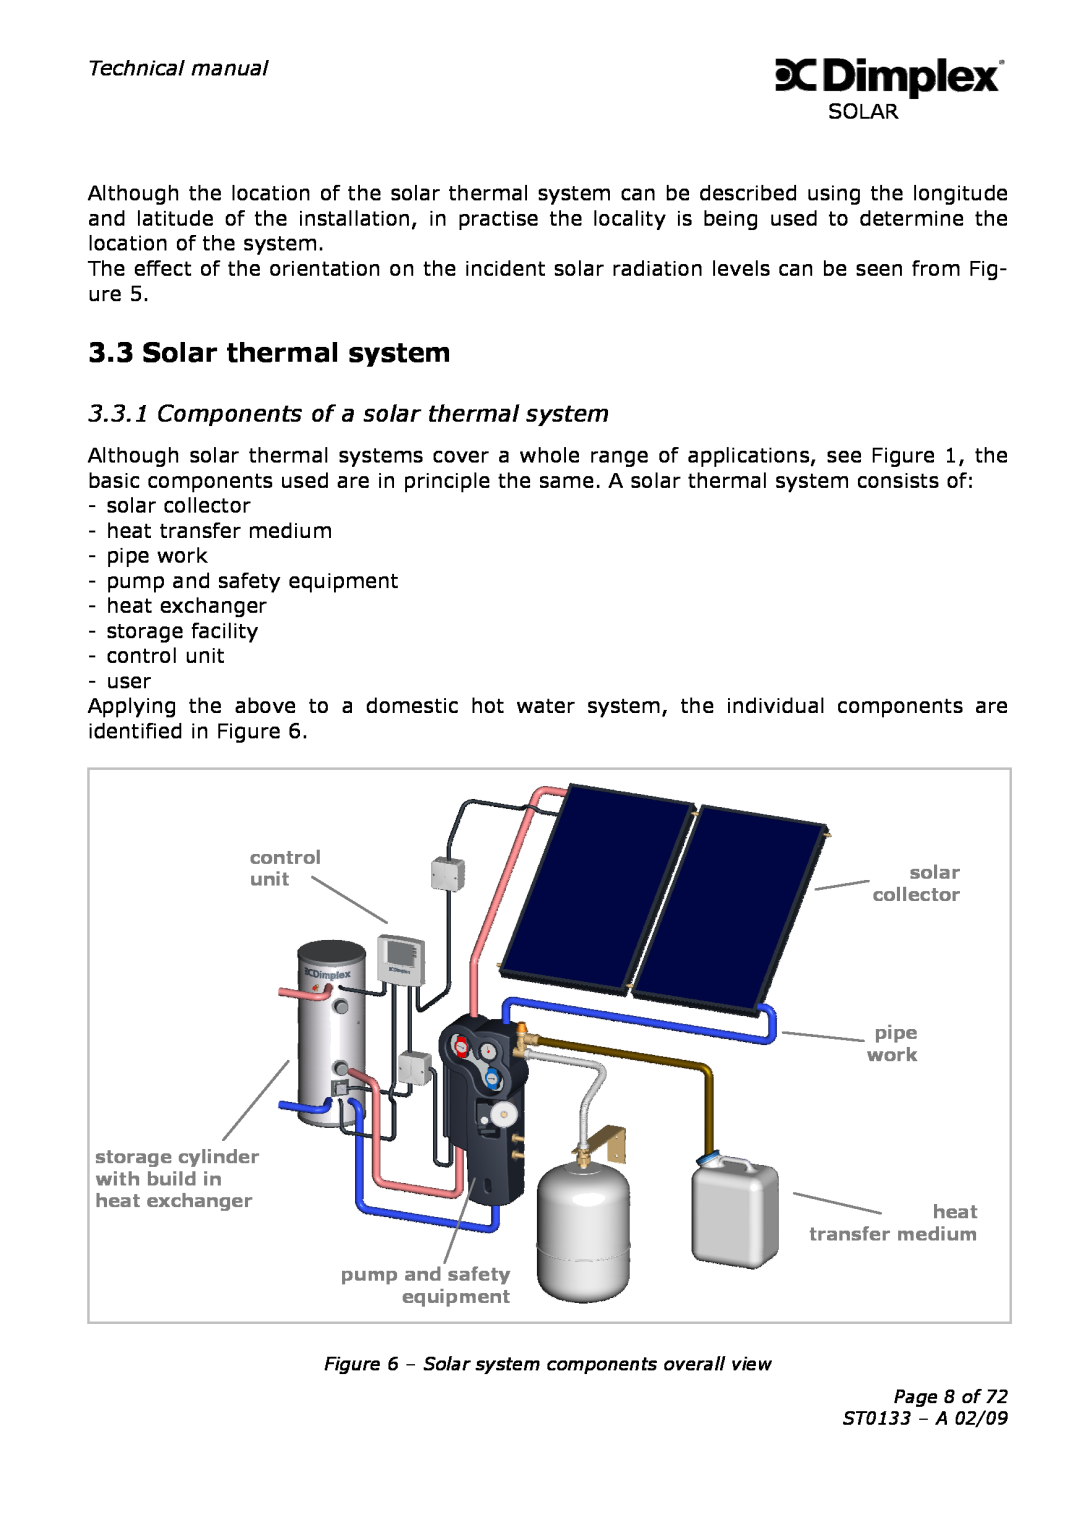 Dimplex ST0133 technical manual Solar thermal system, Components of a solar thermal system 